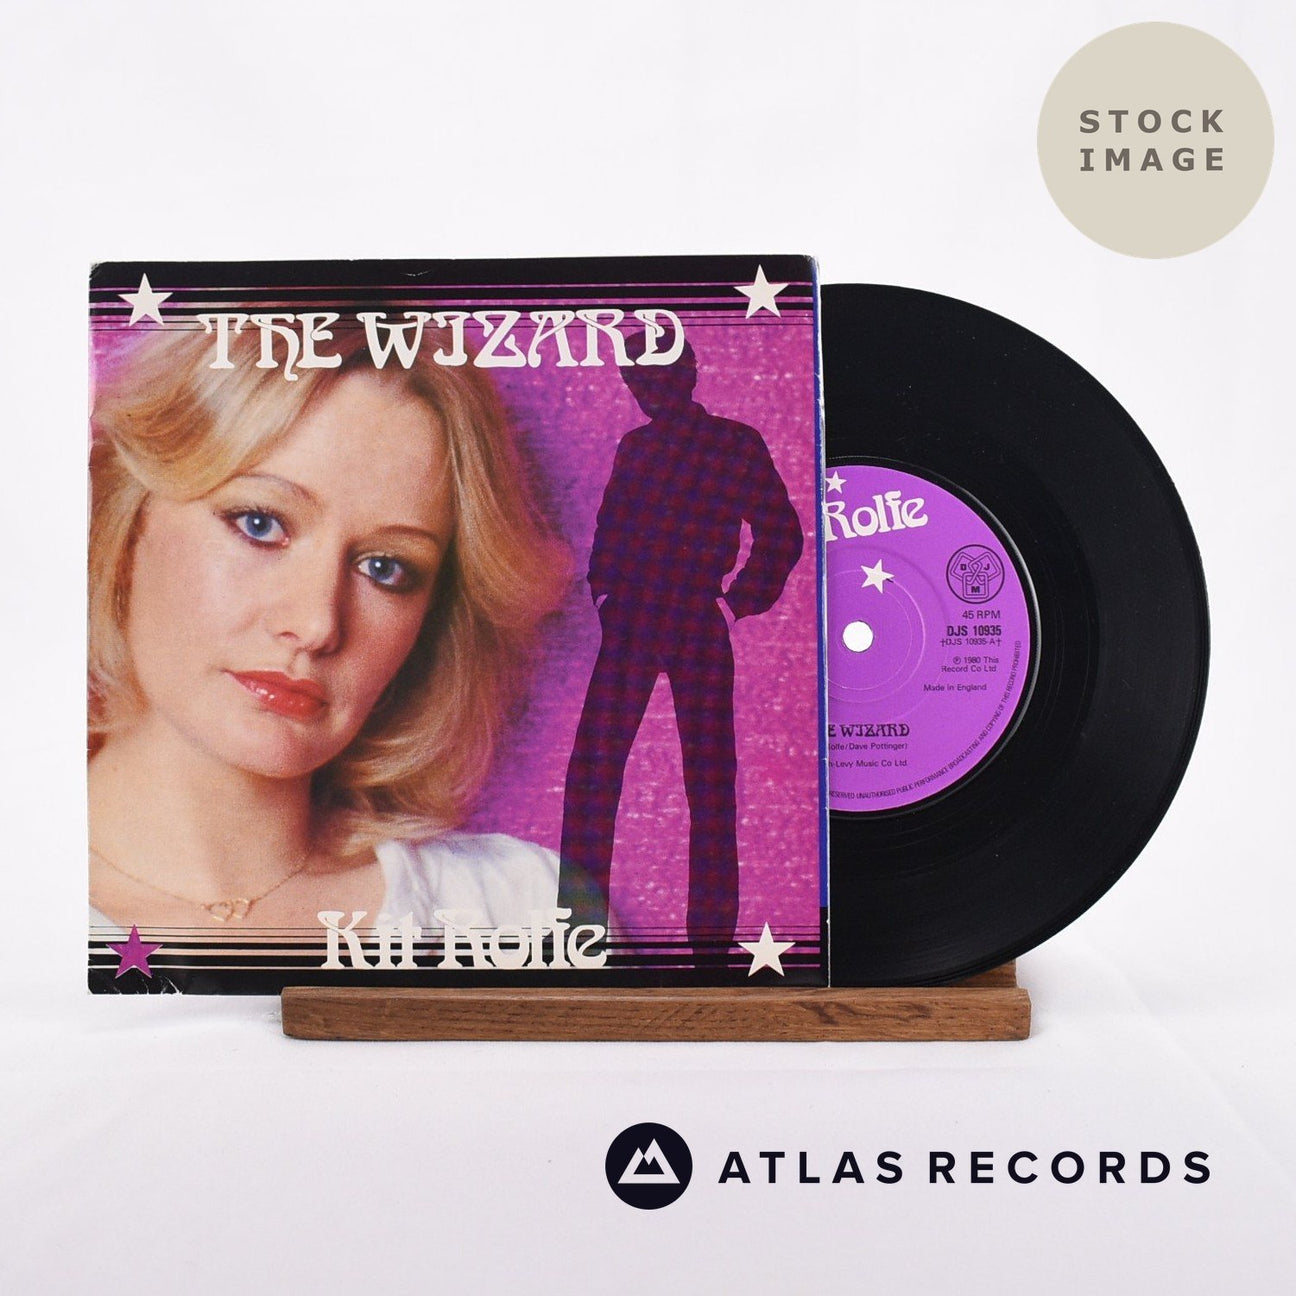 Kit Rolfe The Wizard Vinyl Record - Sleeve & Record Side-By-Side